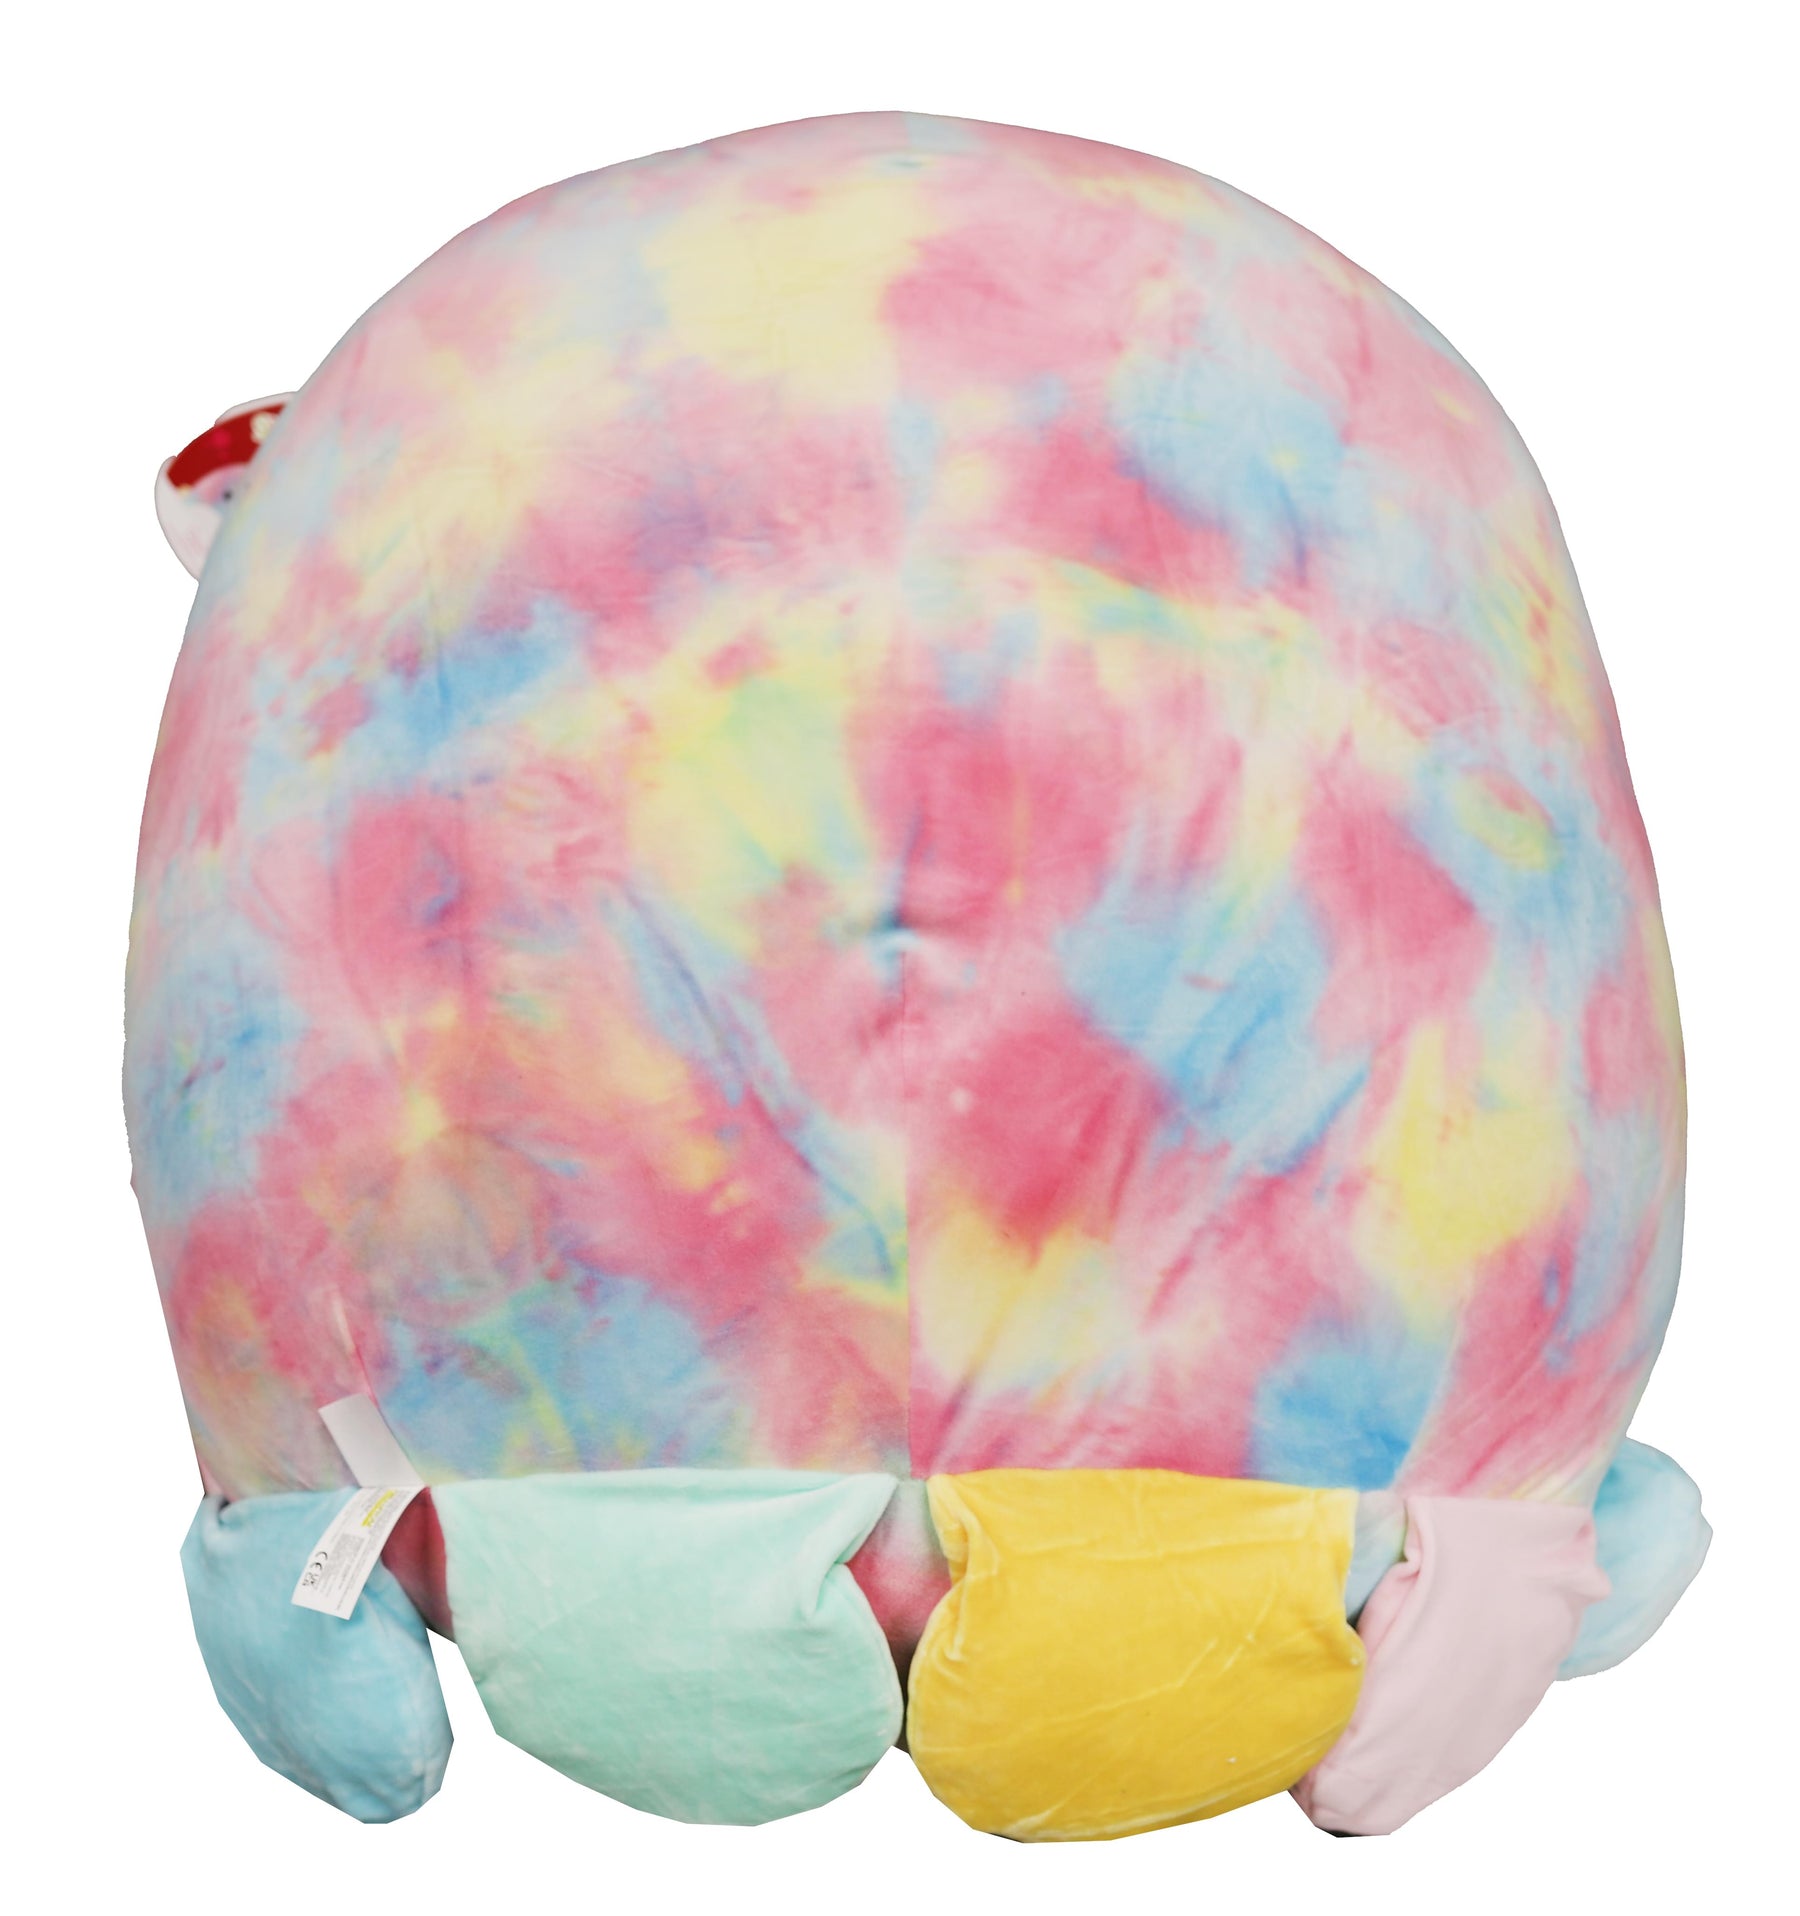 Squishmallow 24 Inch Plush | Opal the Rainbow Octopus